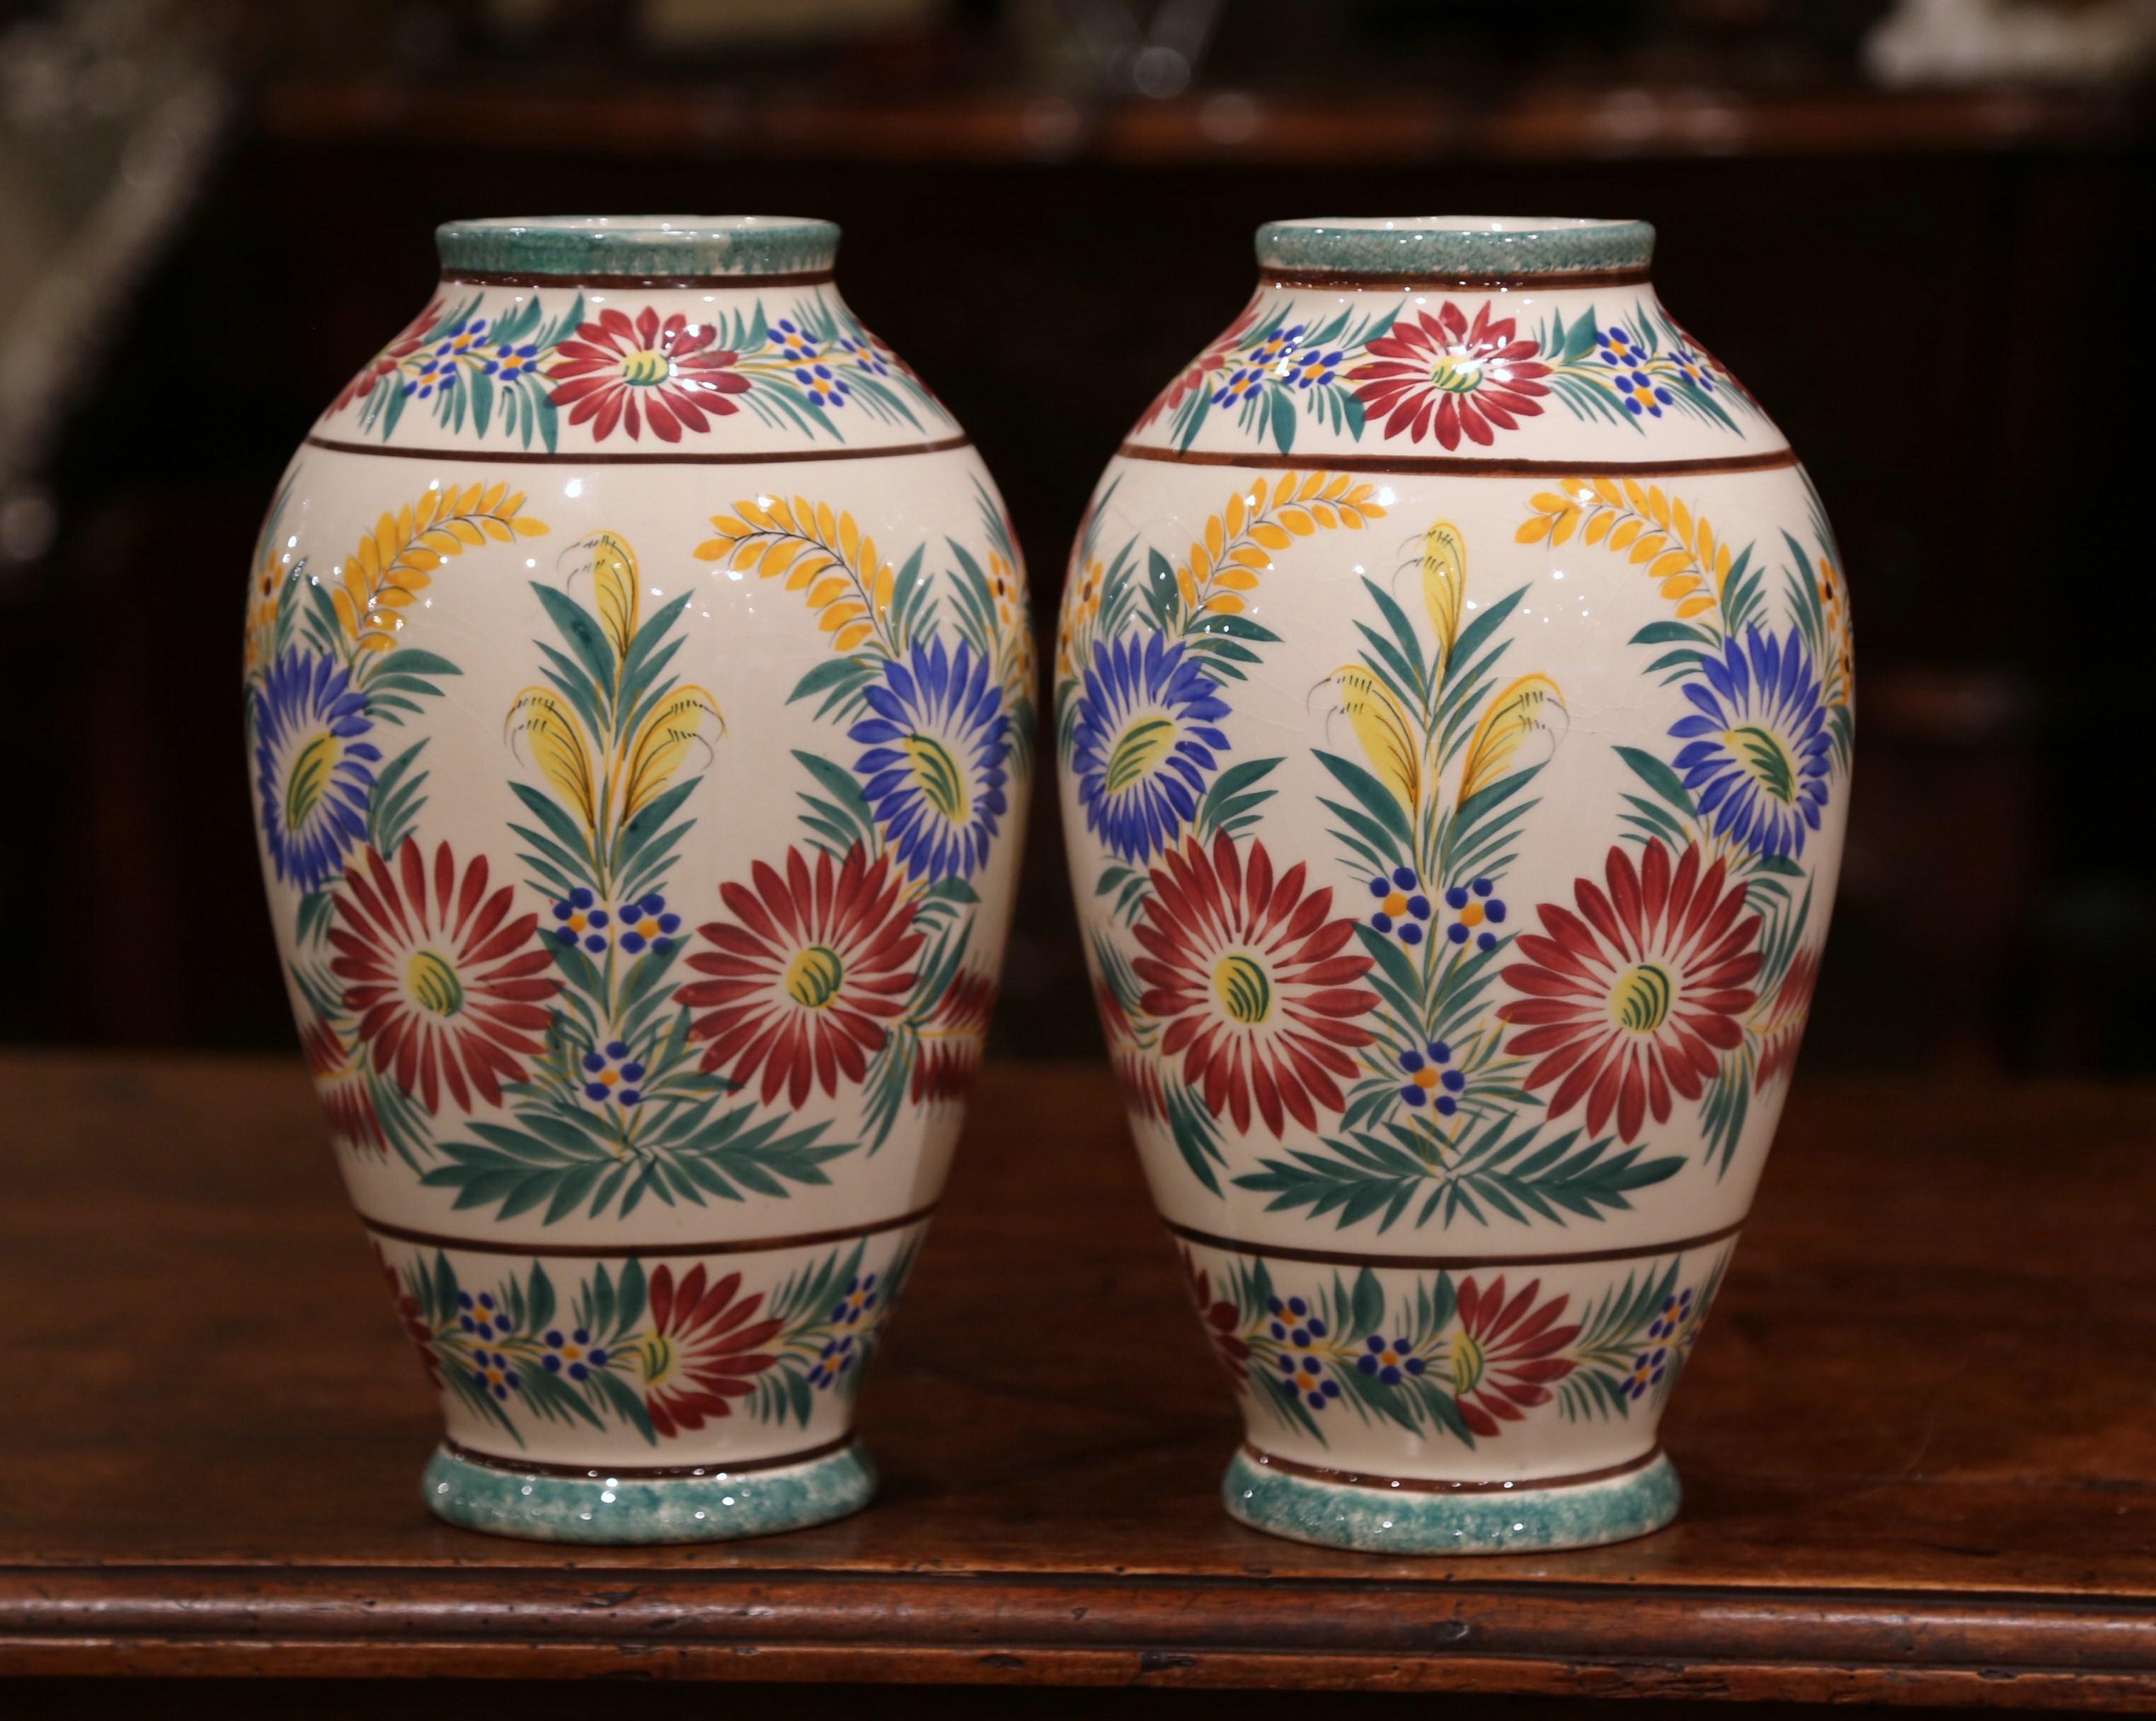 Pair of Early 20th Century French Hand Painted Faience Vases Signed HB Quimper 1